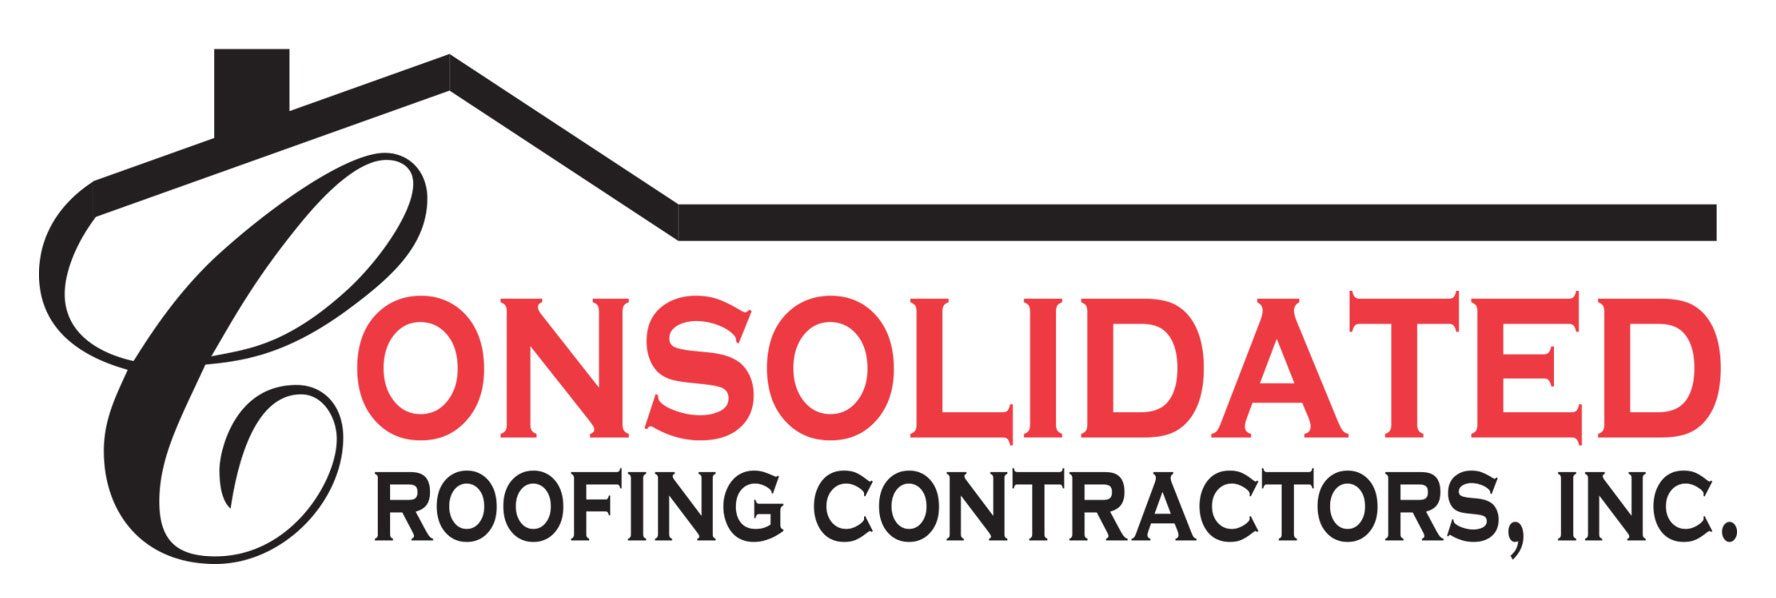 Consolidated Roofing Contractors, Inc. -Logo